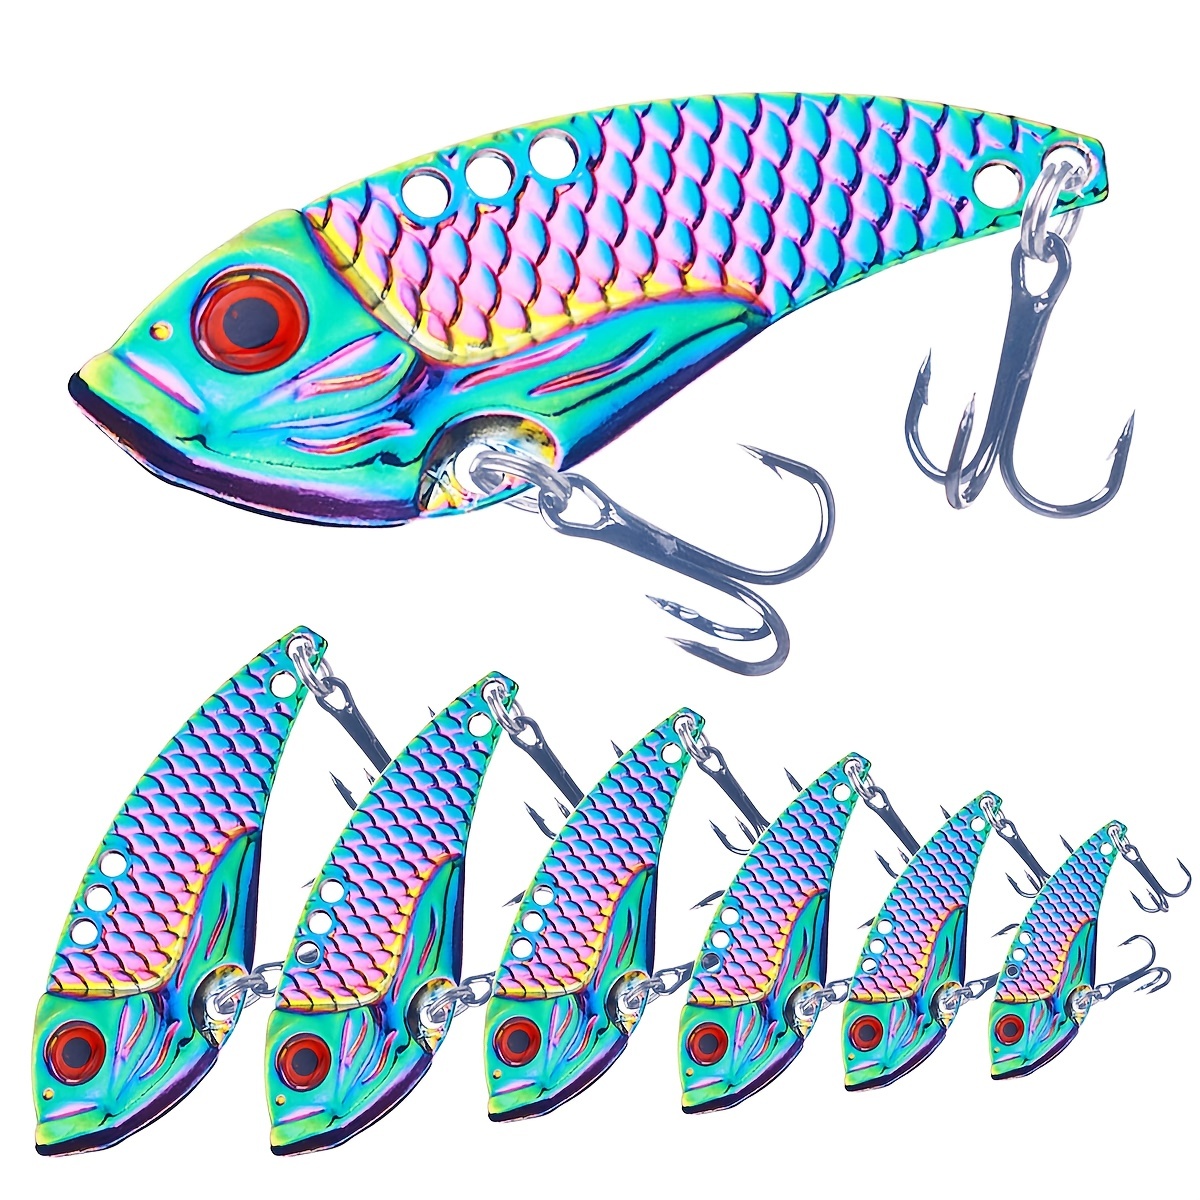  Naiveferry 10Pcs Metal Fishing Lures, Stainless Steel Fishing  Lures Tackle Bait Spinner Bait Fishing Accessories for Bass Trout Salmon  Fishing Lovers Outdoor : Sports & Outdoors